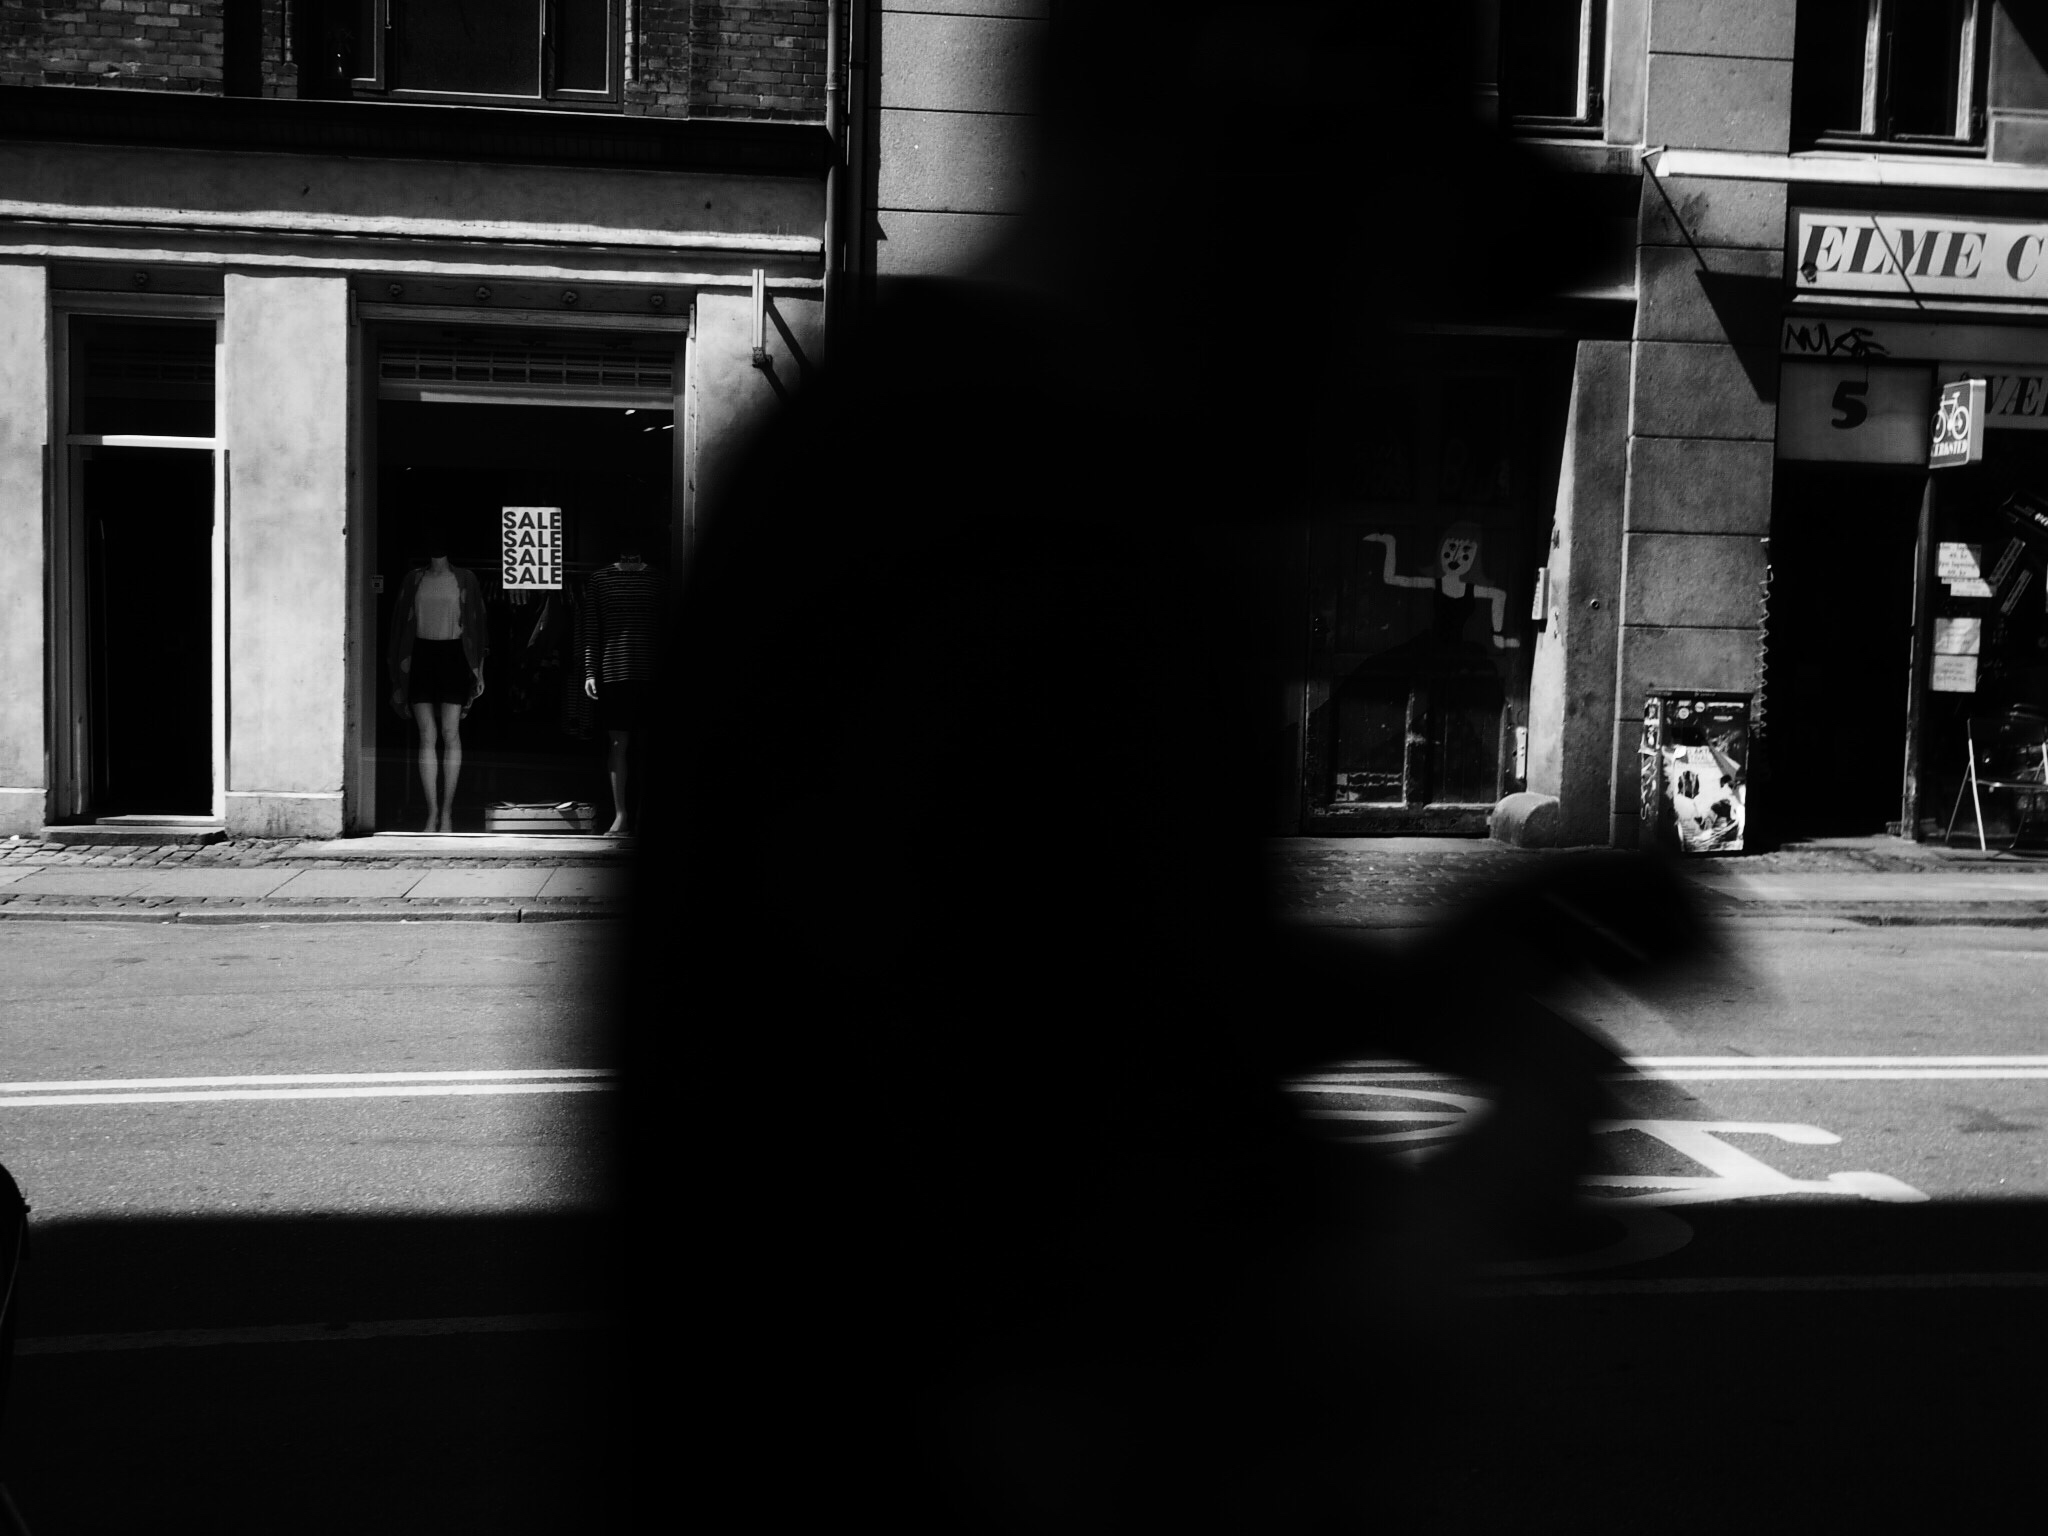 the shadow of a motor bike rider in the foreground on the corner